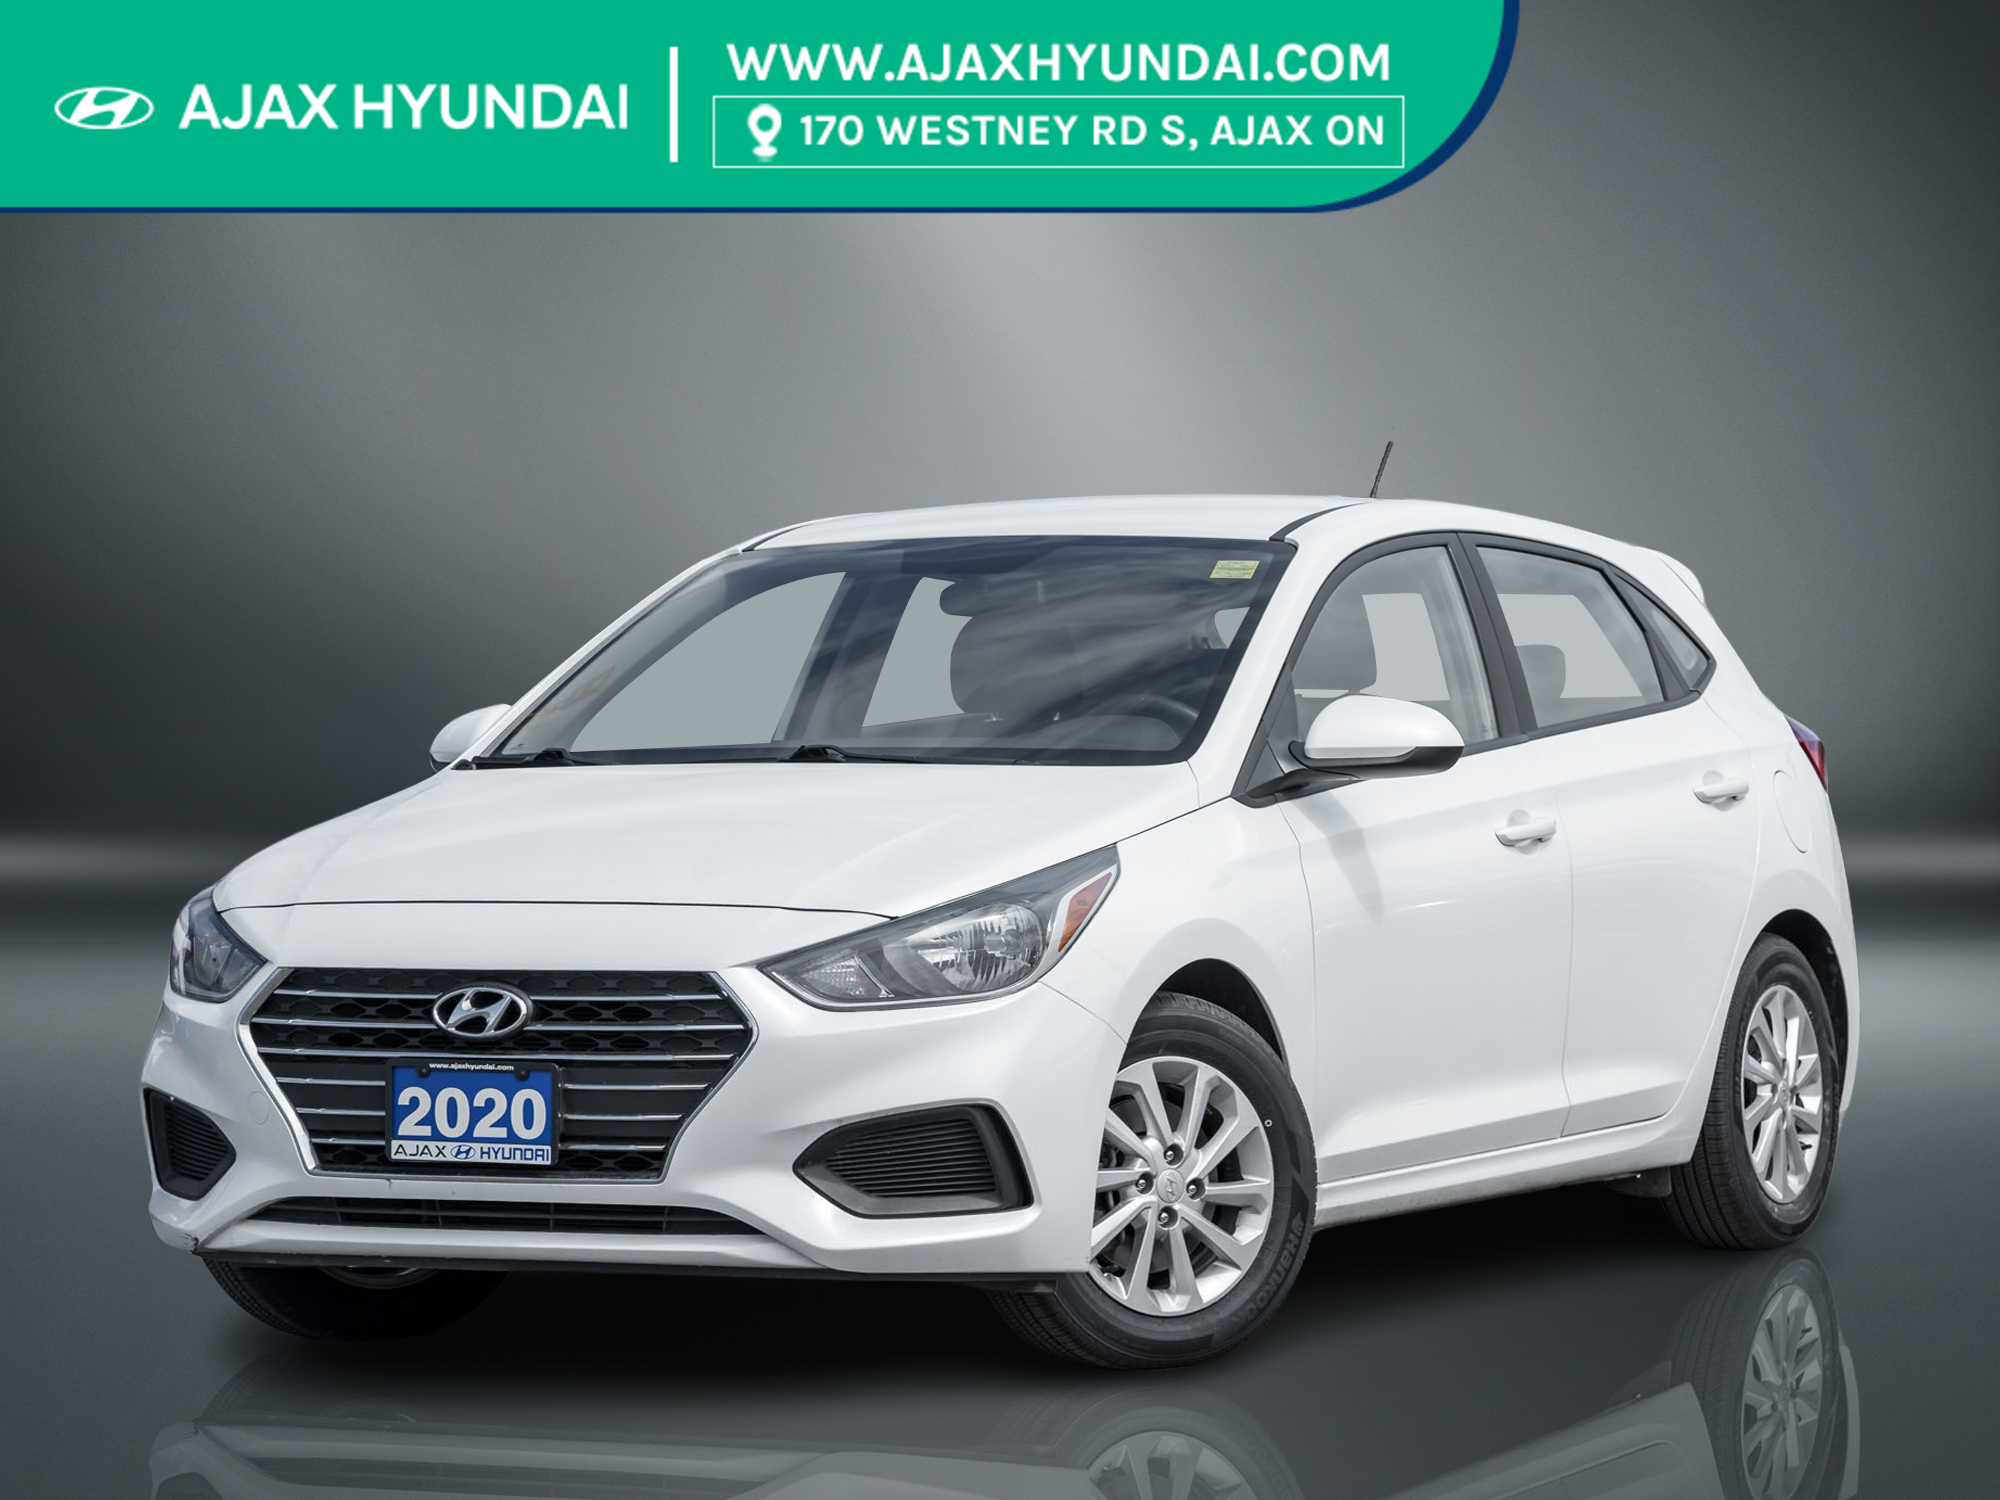 2020 Hyundai Accent Preferred HEATED SEATS | RATES FROM 4.99%